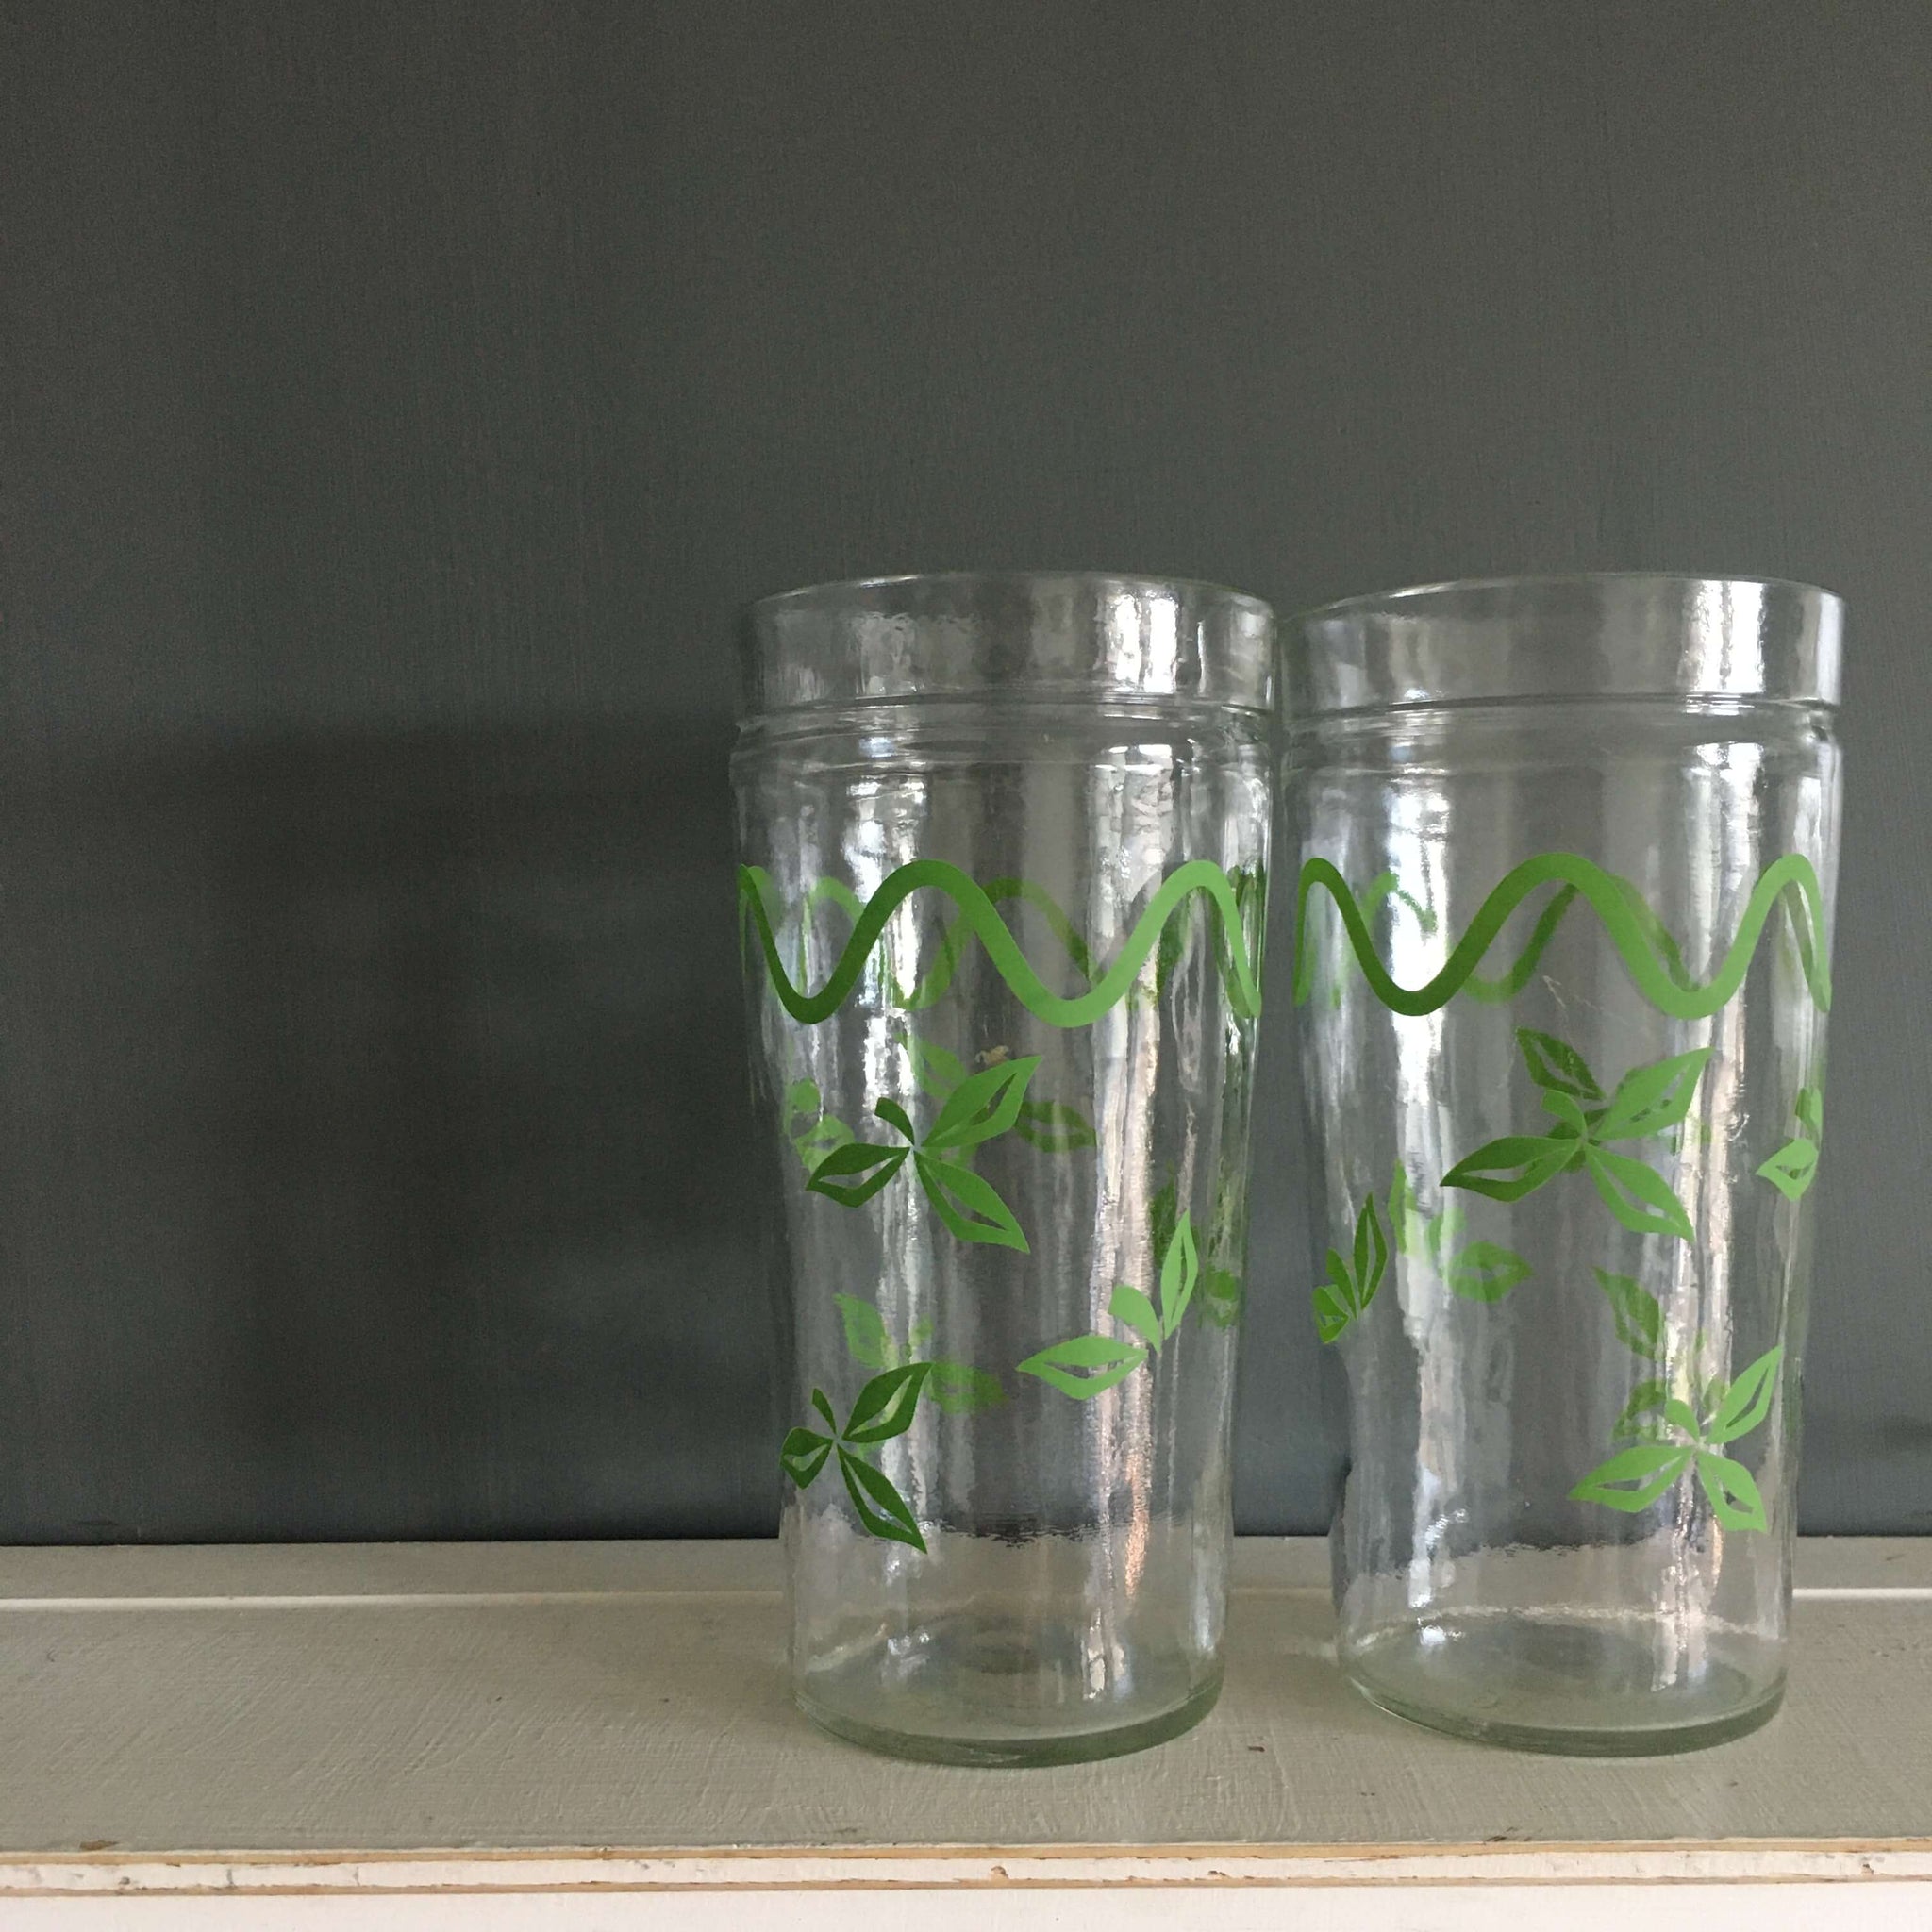 Vintage Anchor Hocking Tall Glasses with Green Leaves & Ric Rac Design - Set of Two